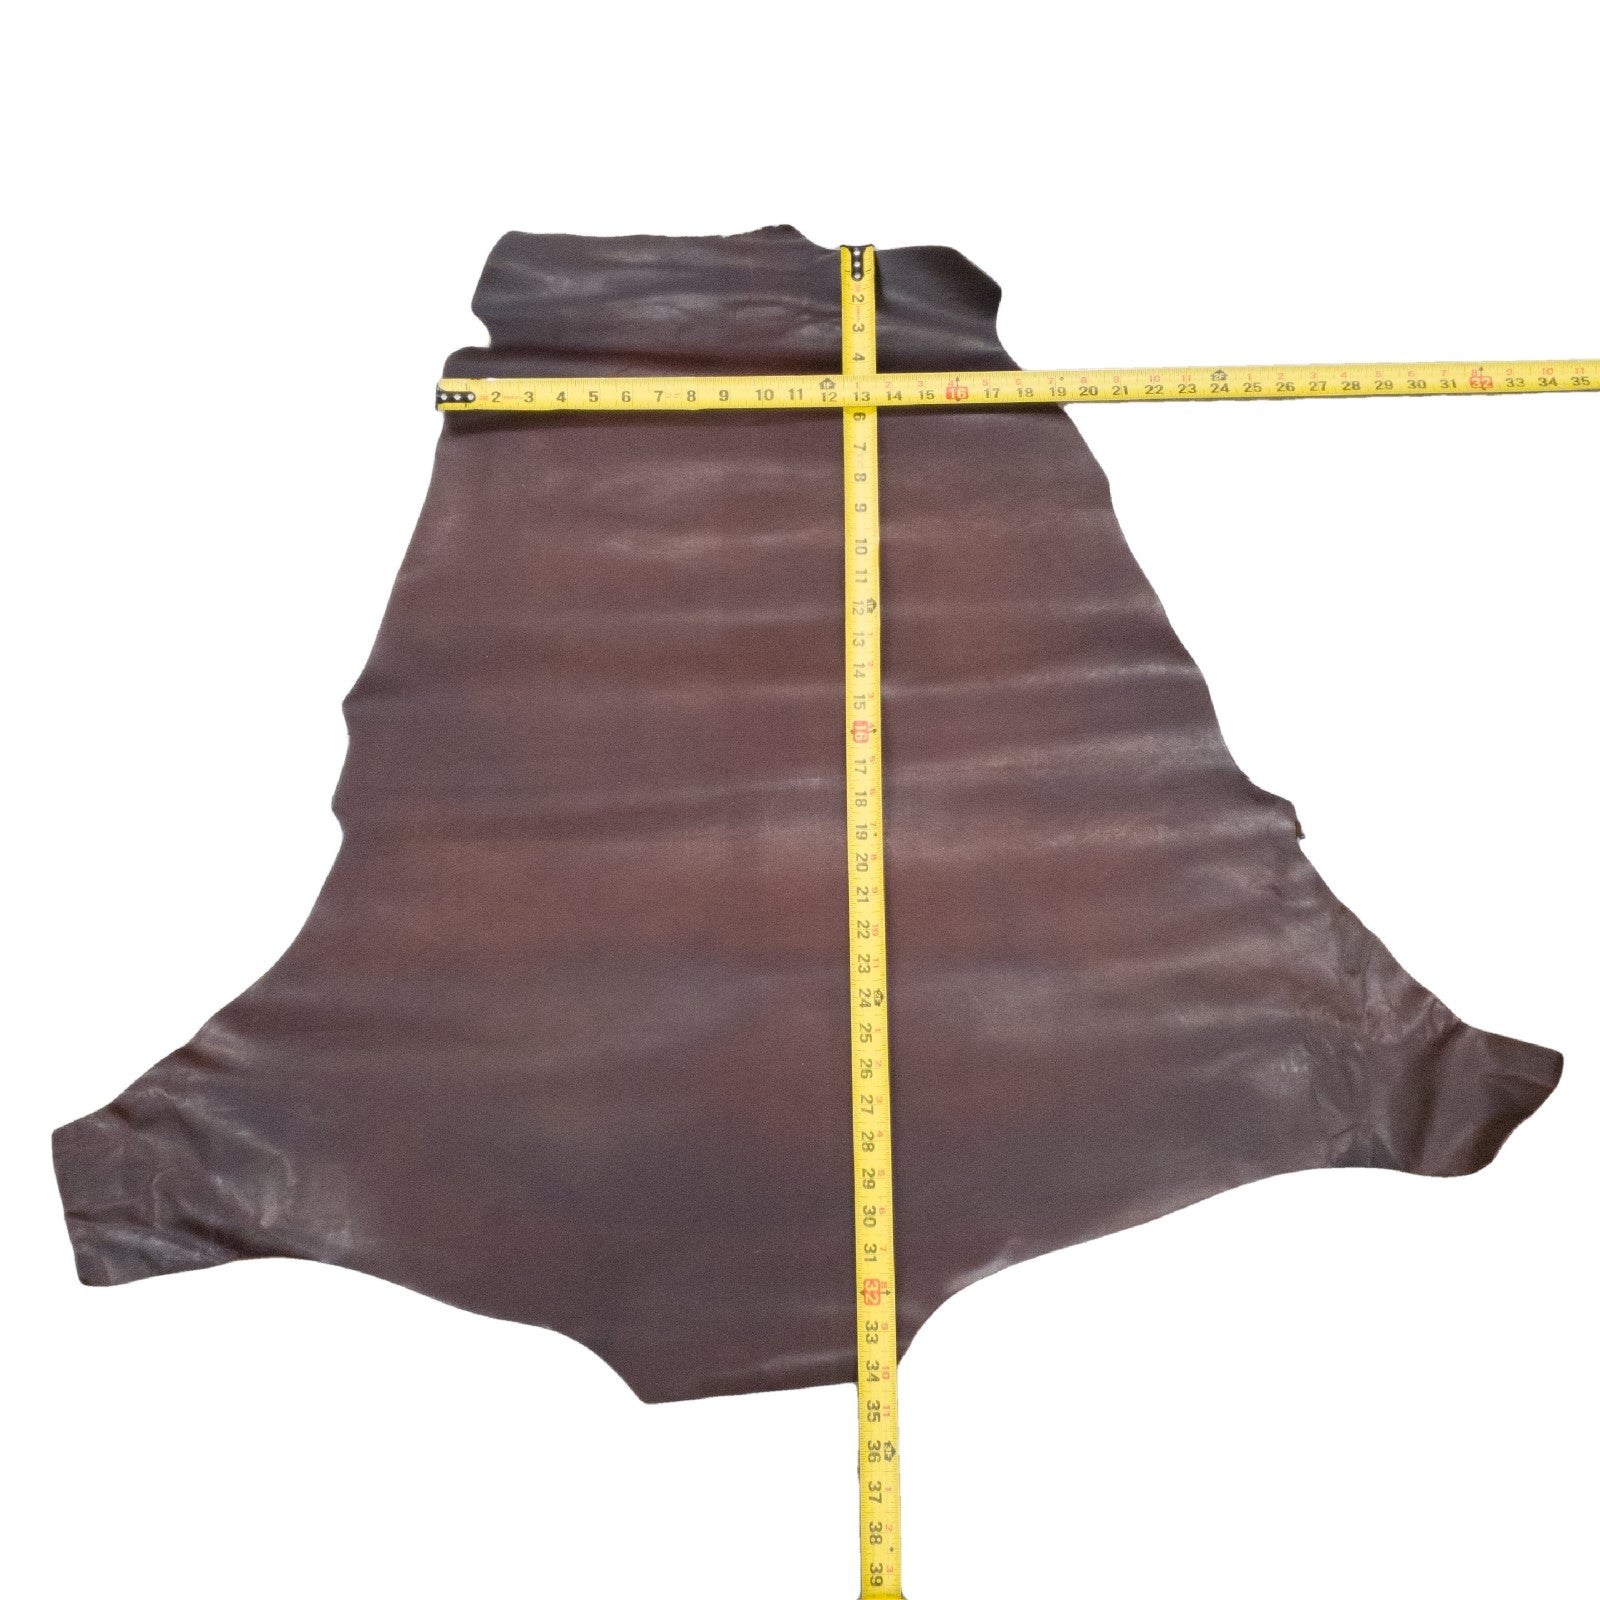 Kangaroo Chocolate Dyed Veg Tanned 5 - 7 Sq Ft Hides 2-3 oz, 6 Sq Ft / Hide 3 | The Leather Guy